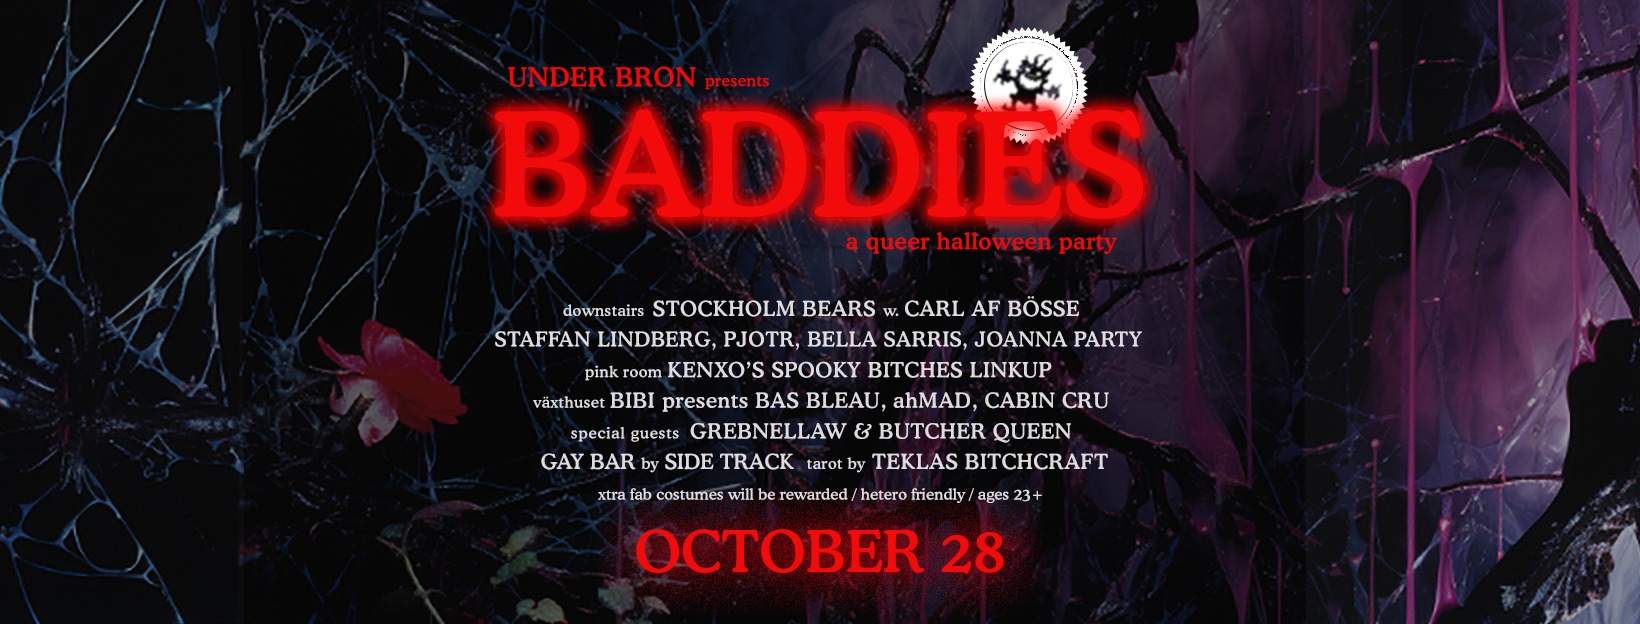 BADDIES - A QUEER HALLOWEEN PARTY - フライヤー表